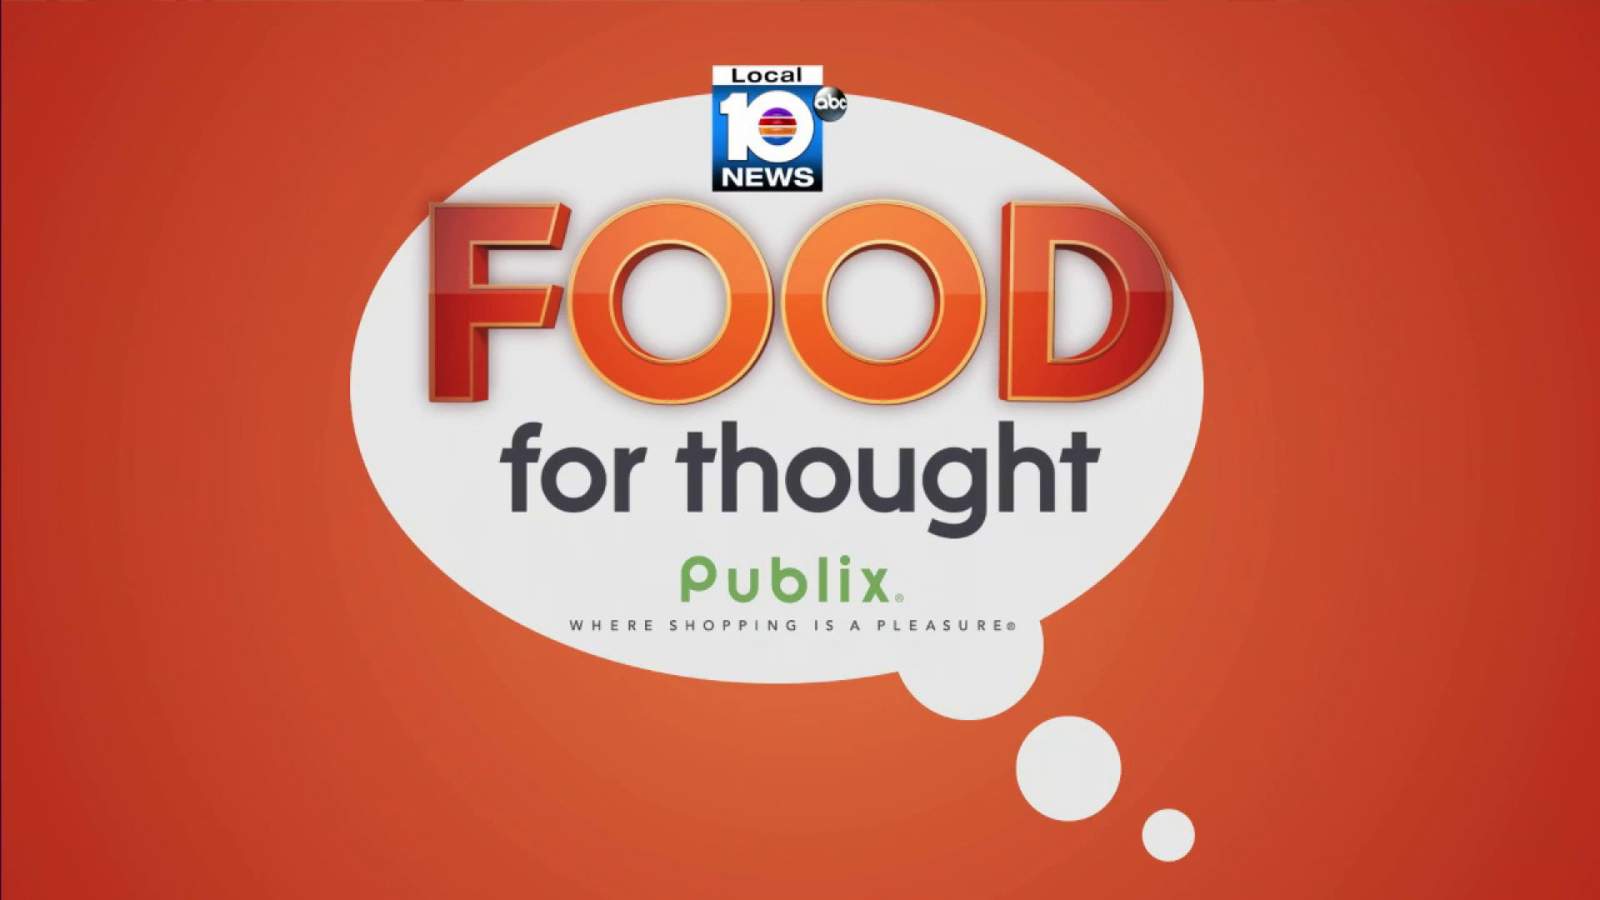 Food For Thought campaign begins in Lauderhill